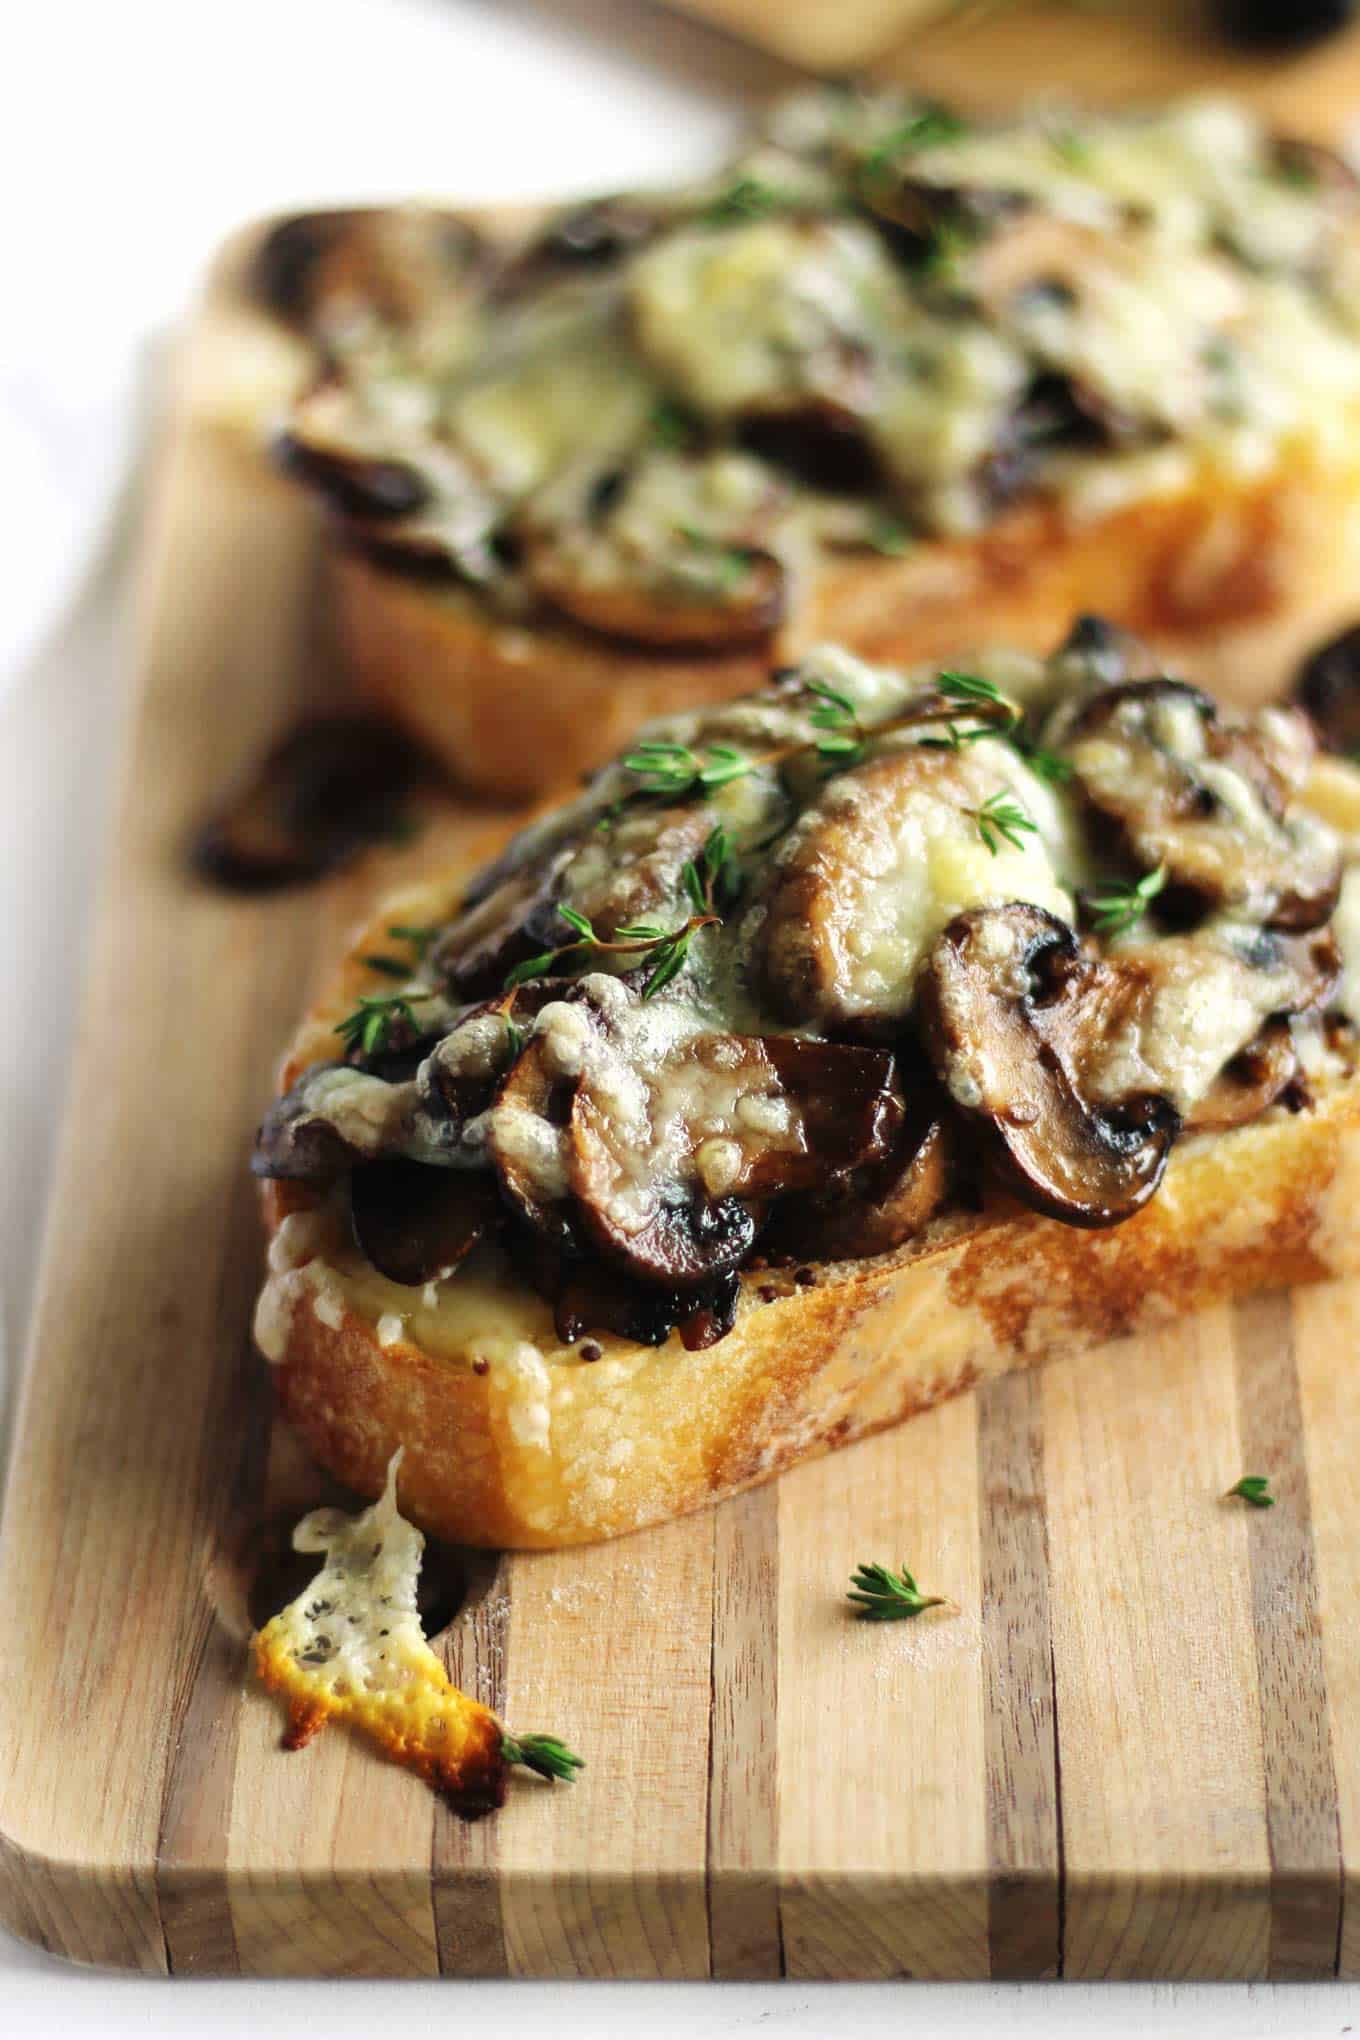 A photo of cheesy mushrooms on toast topped with fresh thyme leaves.